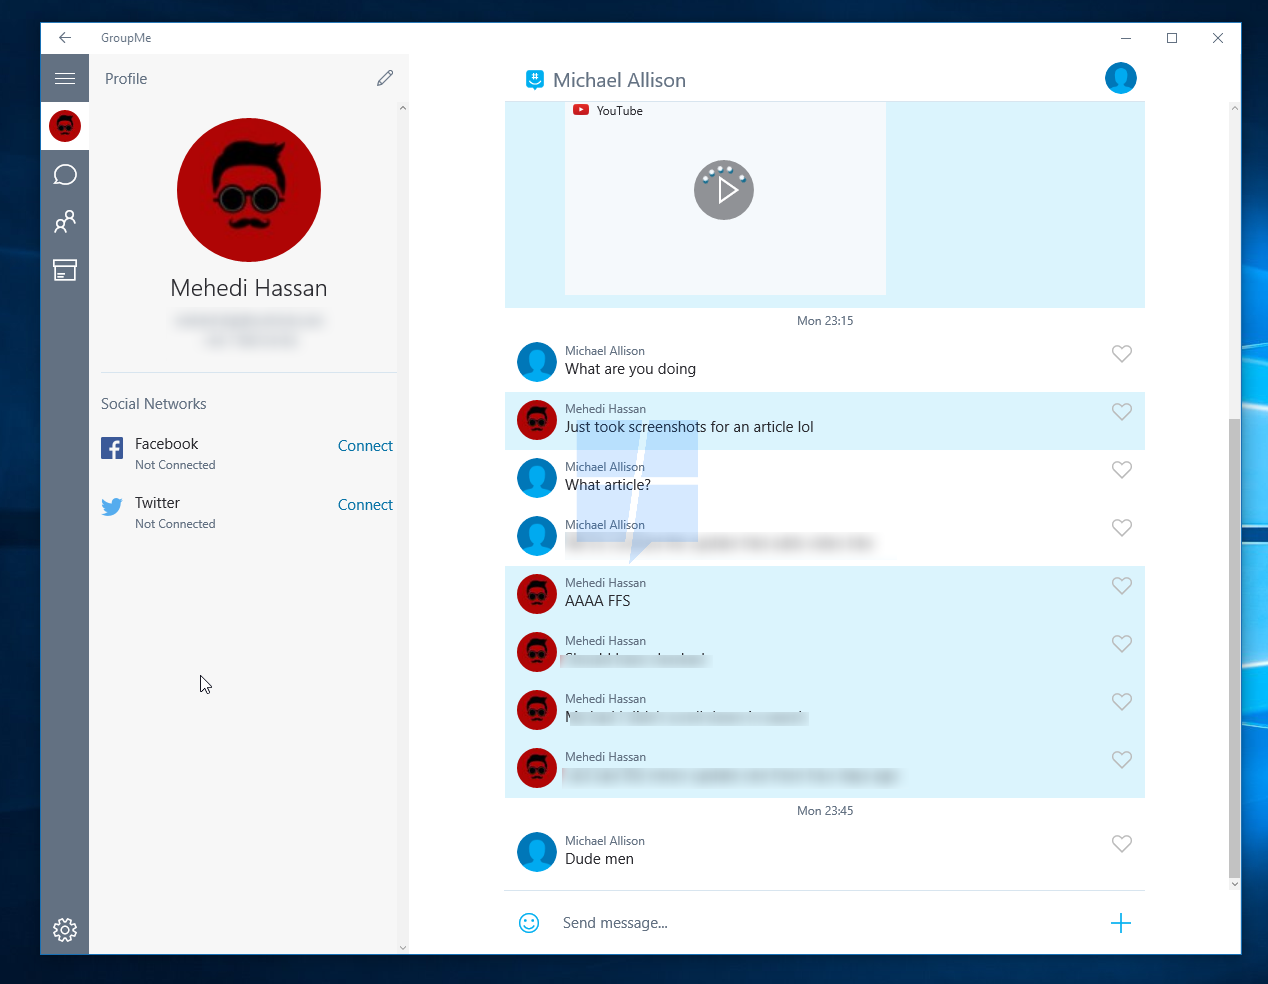 Groupme App For PC Free Download